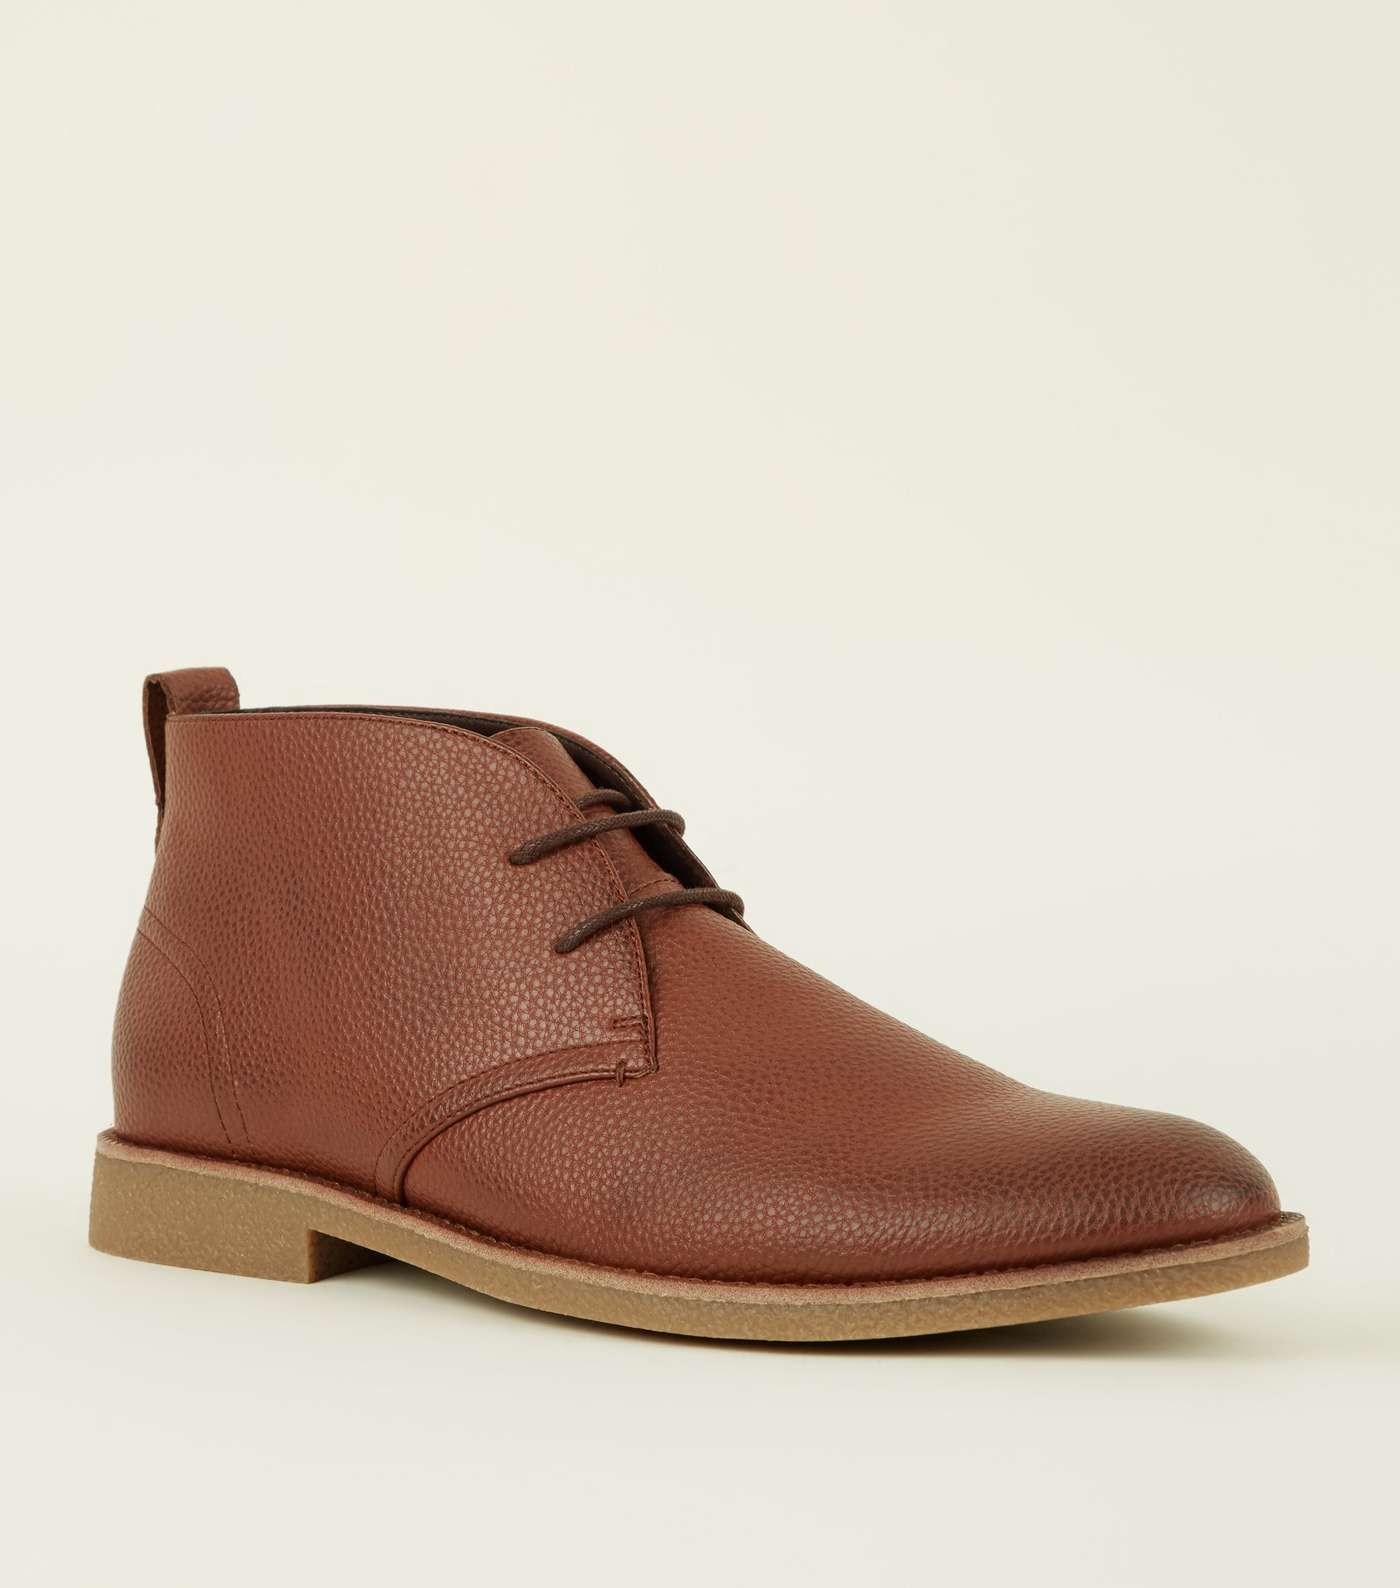 Tan Leather-Look Desert Boots  Image 2